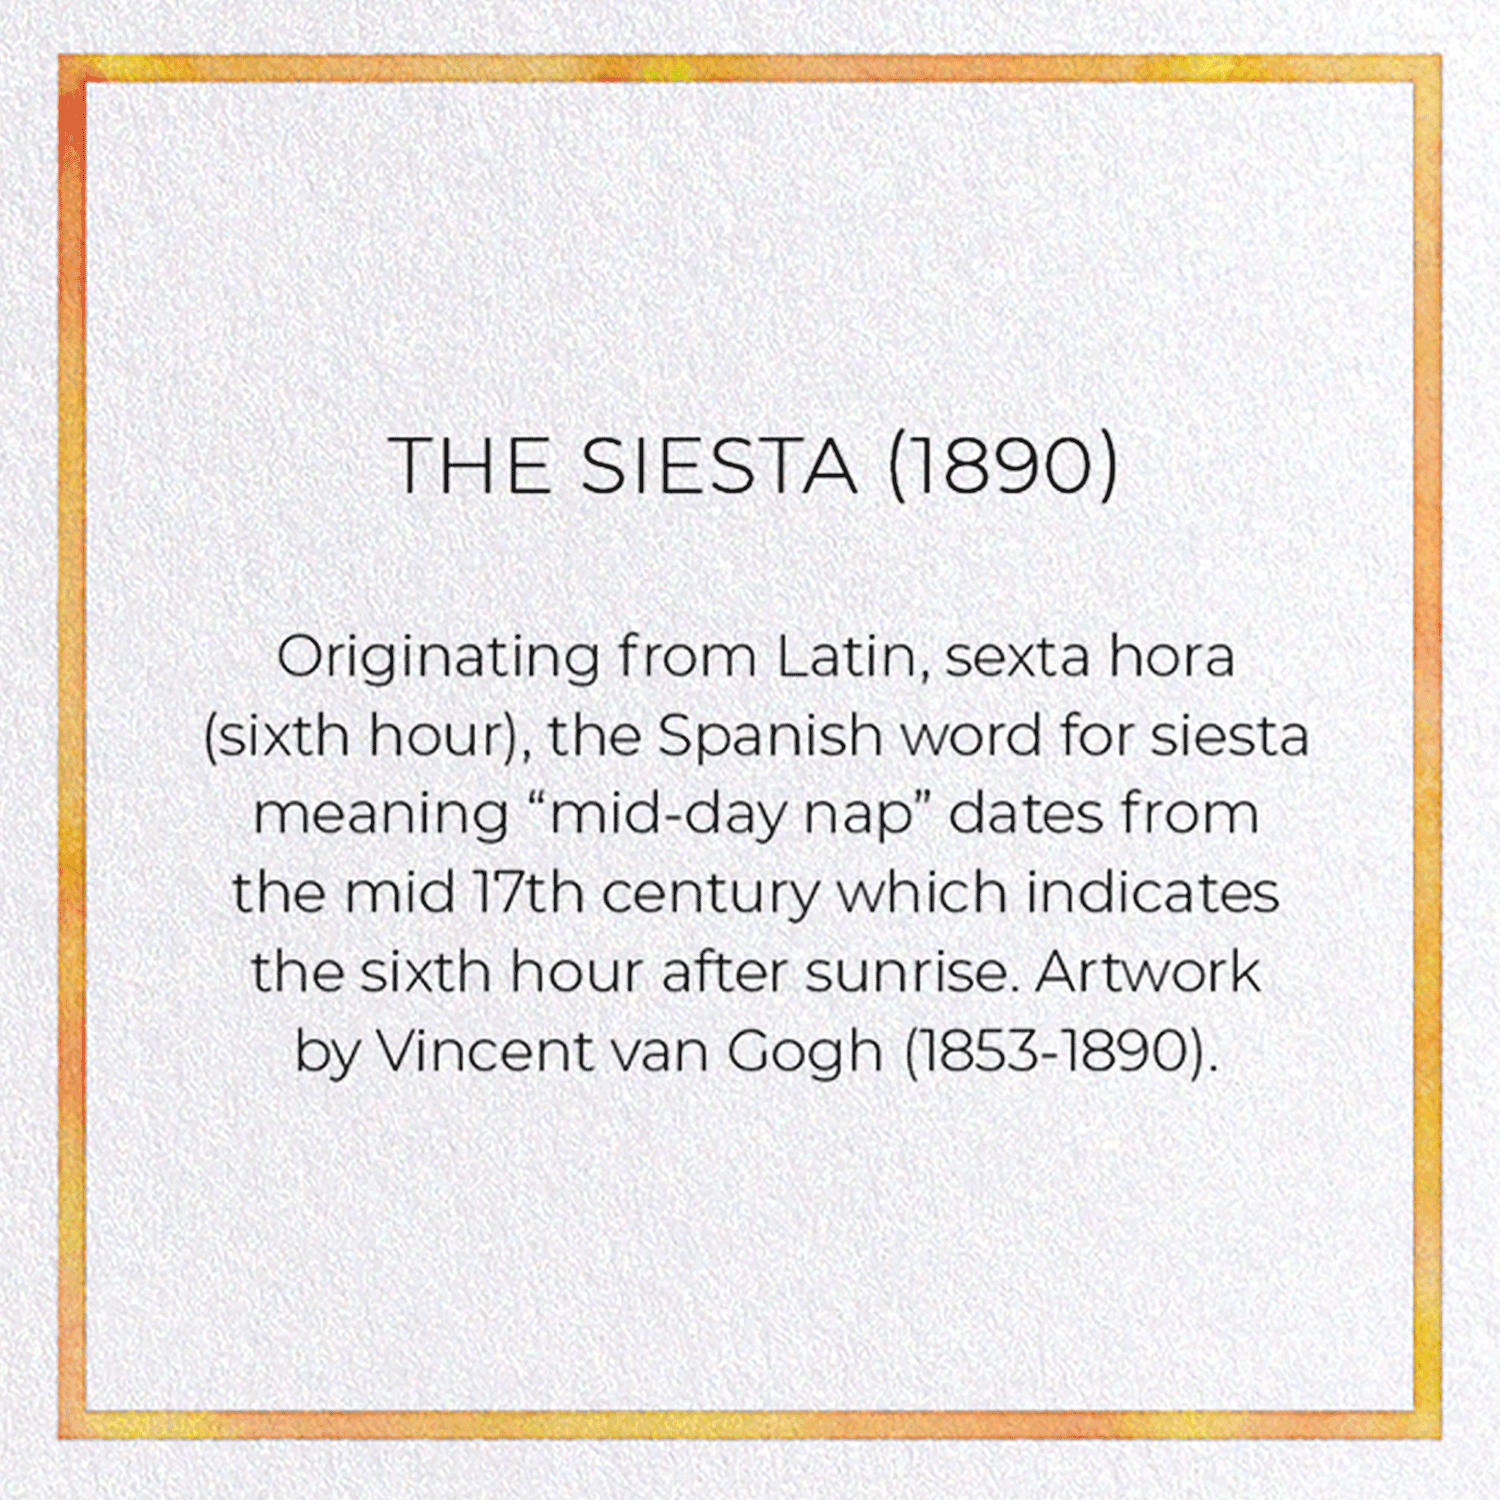 THE SIESTA (1890): Painting Greeting Card